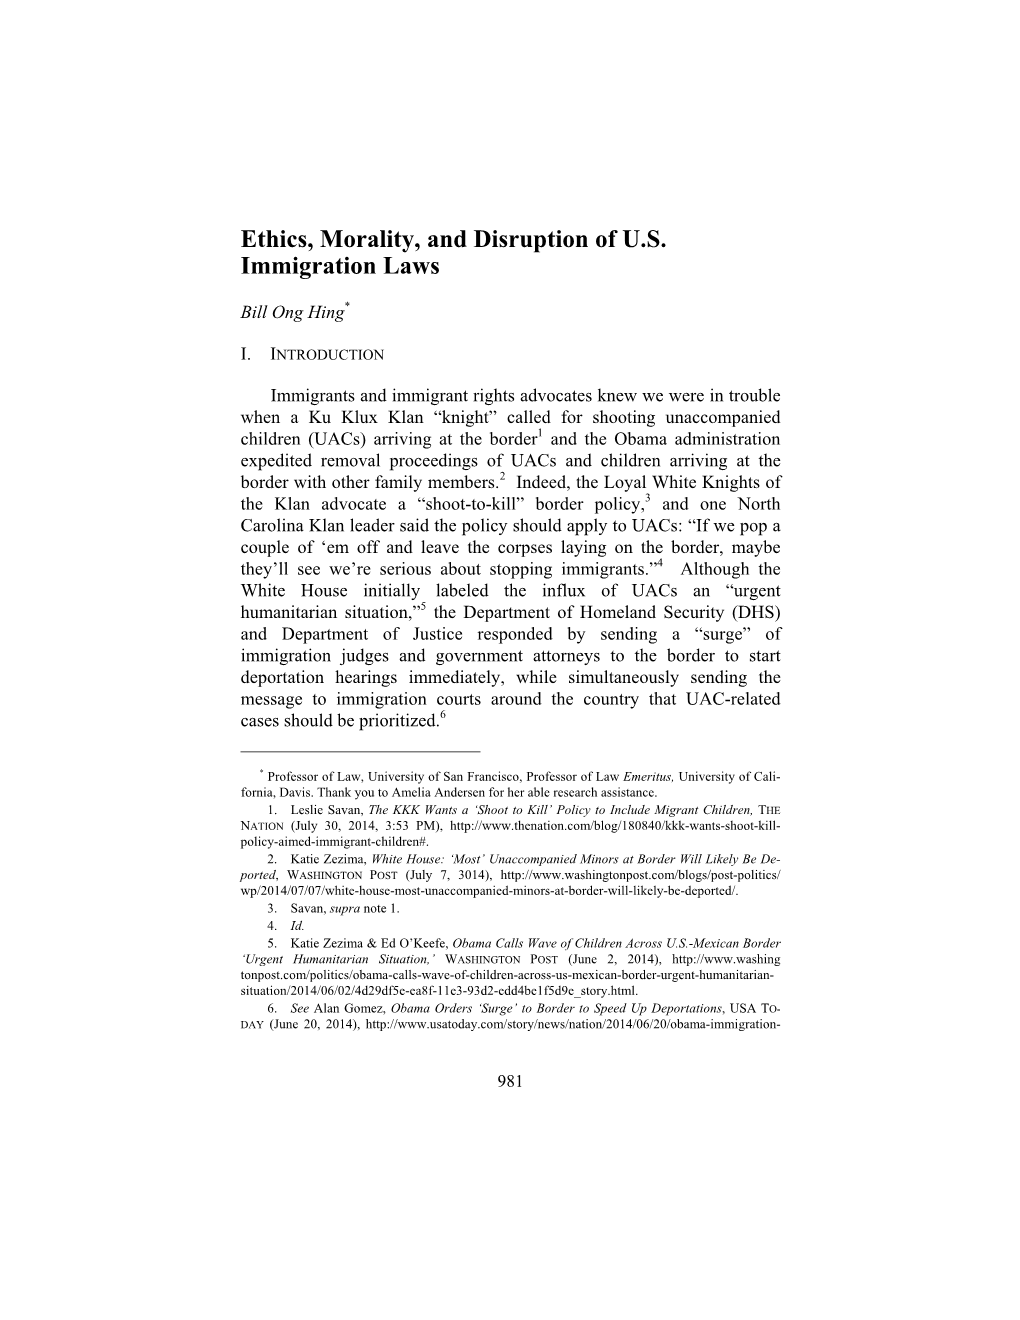 Ethics, Morality, and Disruption of U.S. Immigration Laws